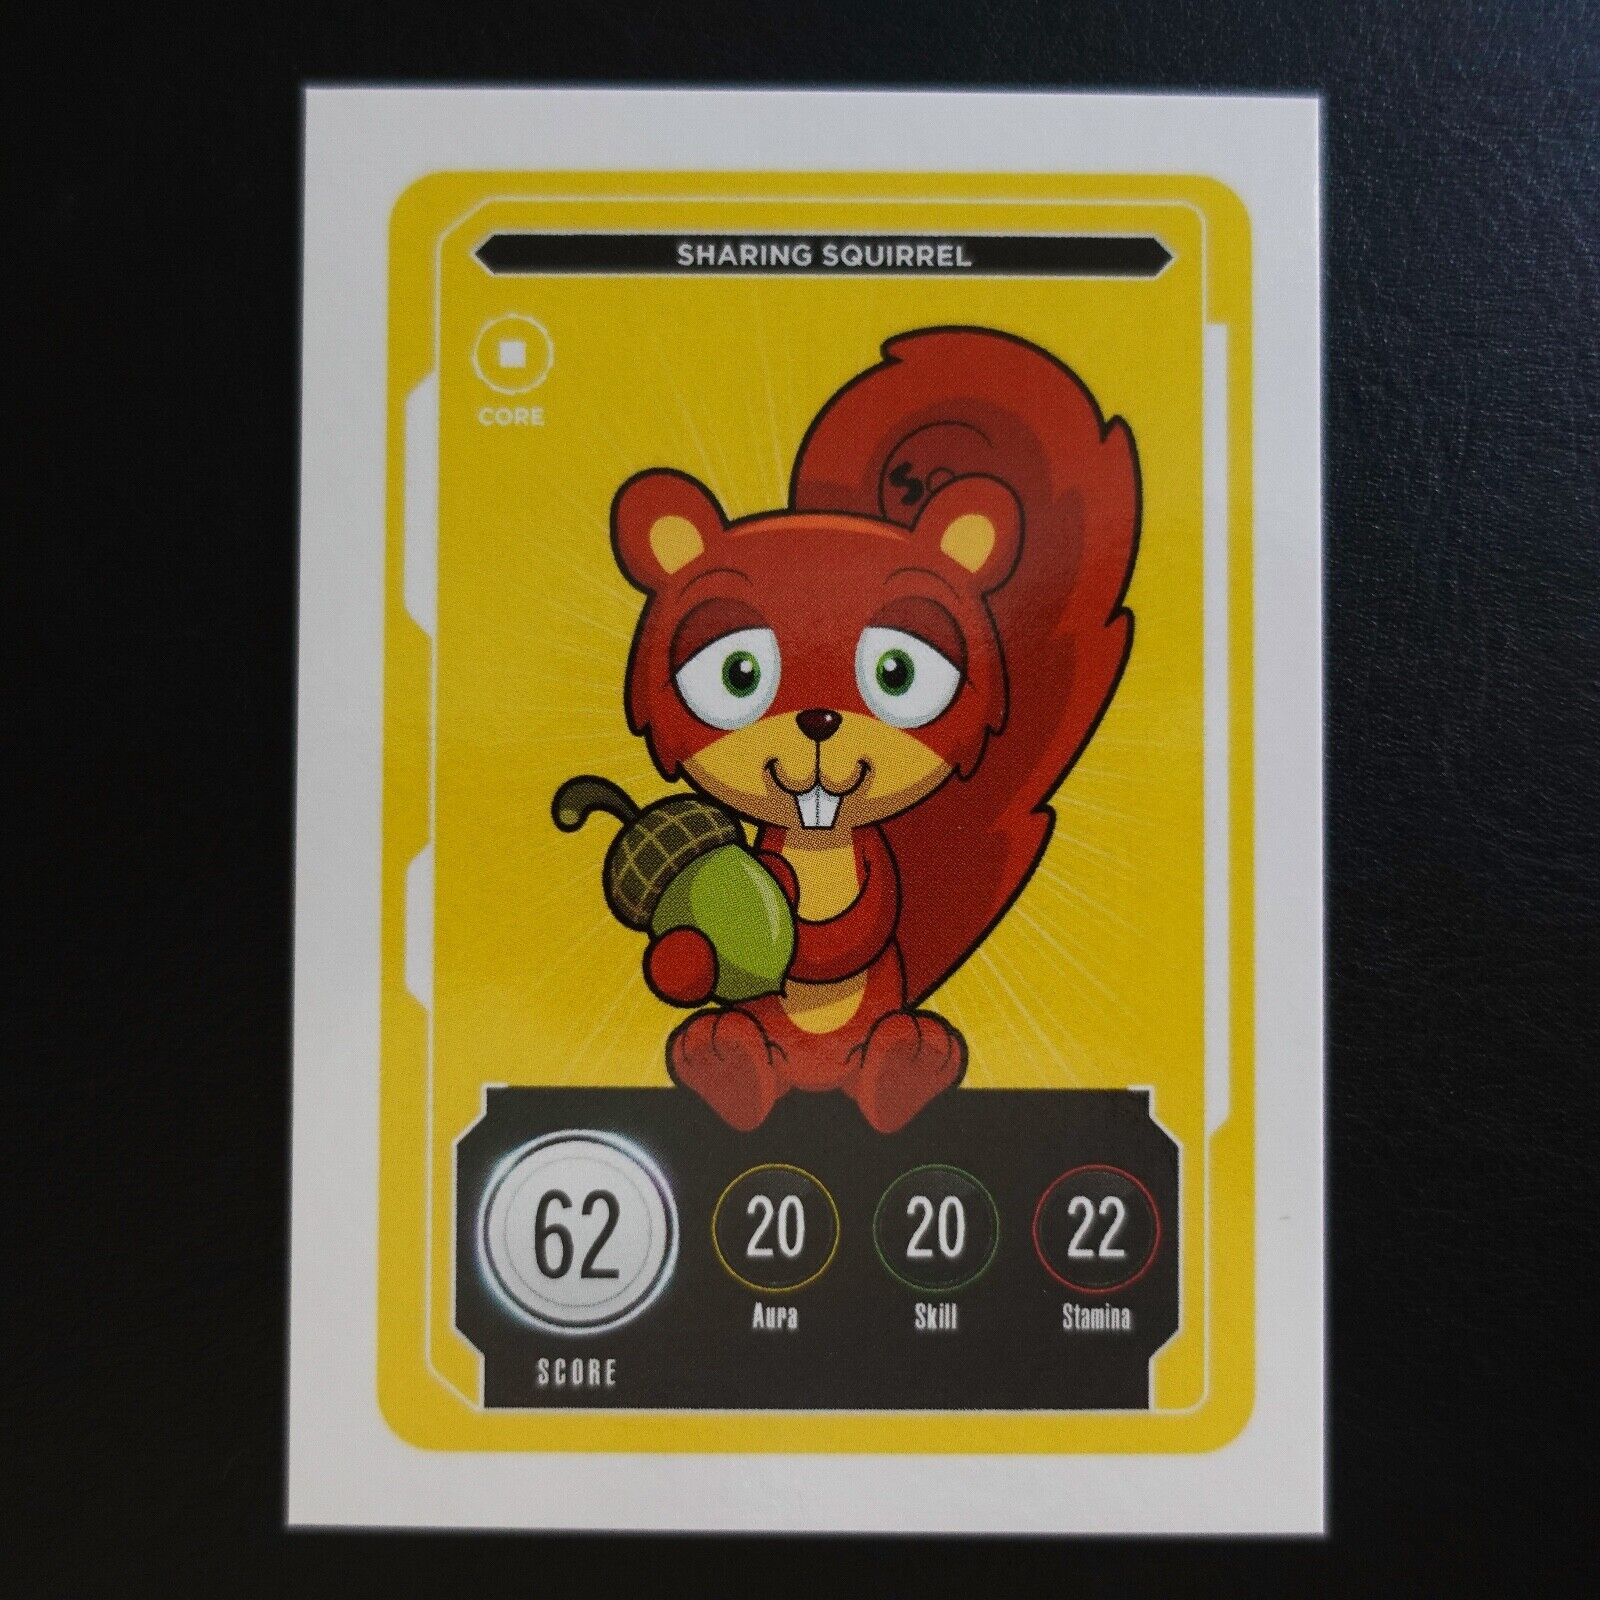 Sharing Squirrel Veefriends Compete And Collect Series 2 Trading Card Gary Vee